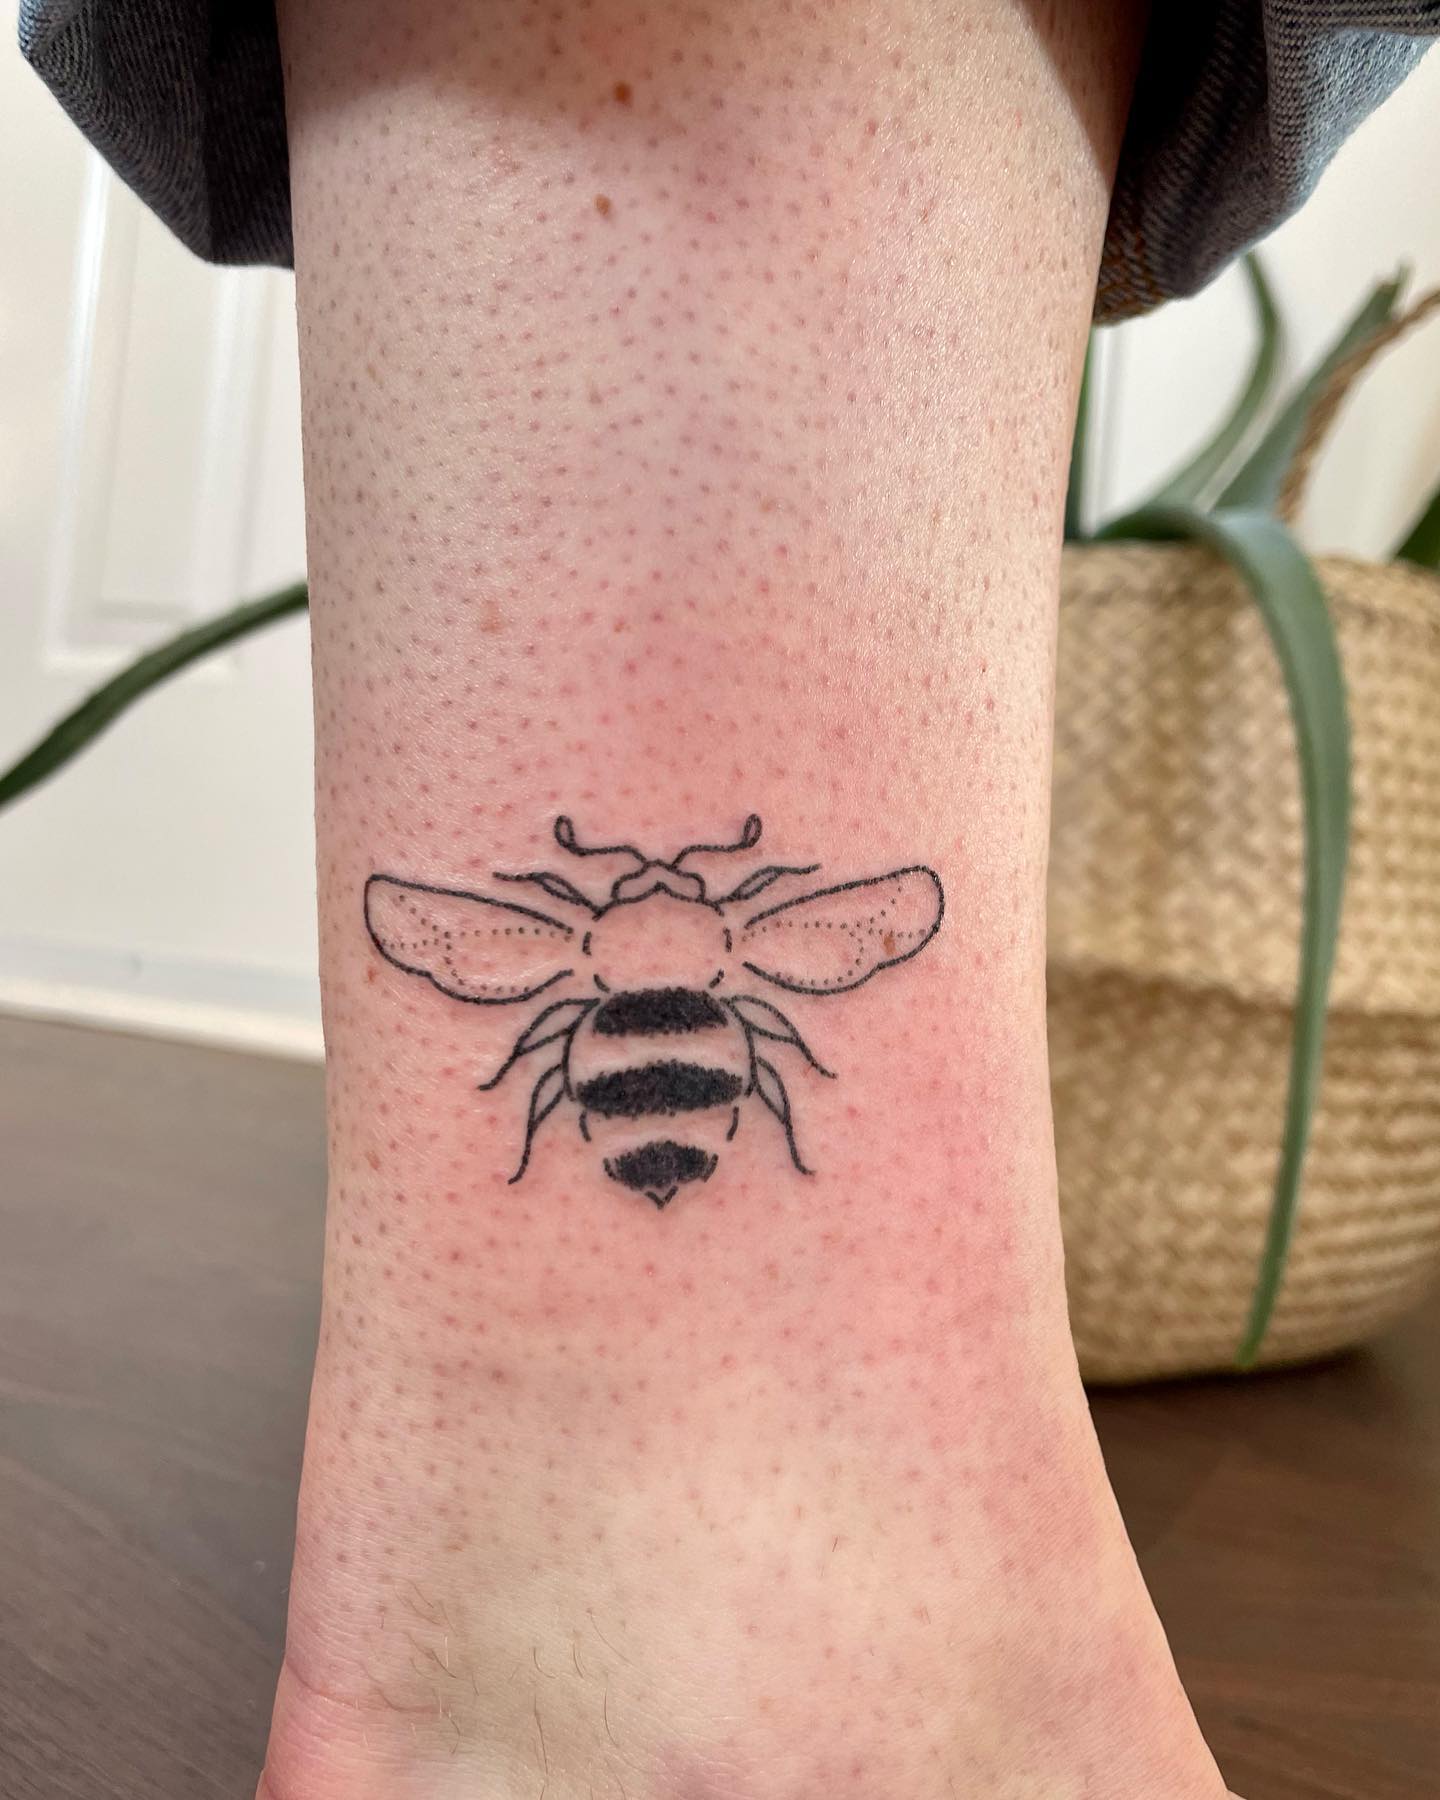 Go for a bee tattoo as they represent your curious side, as well as your calm personality. Anyone who fancies and is vocal about the importance of bees will enjoy this tattoo.